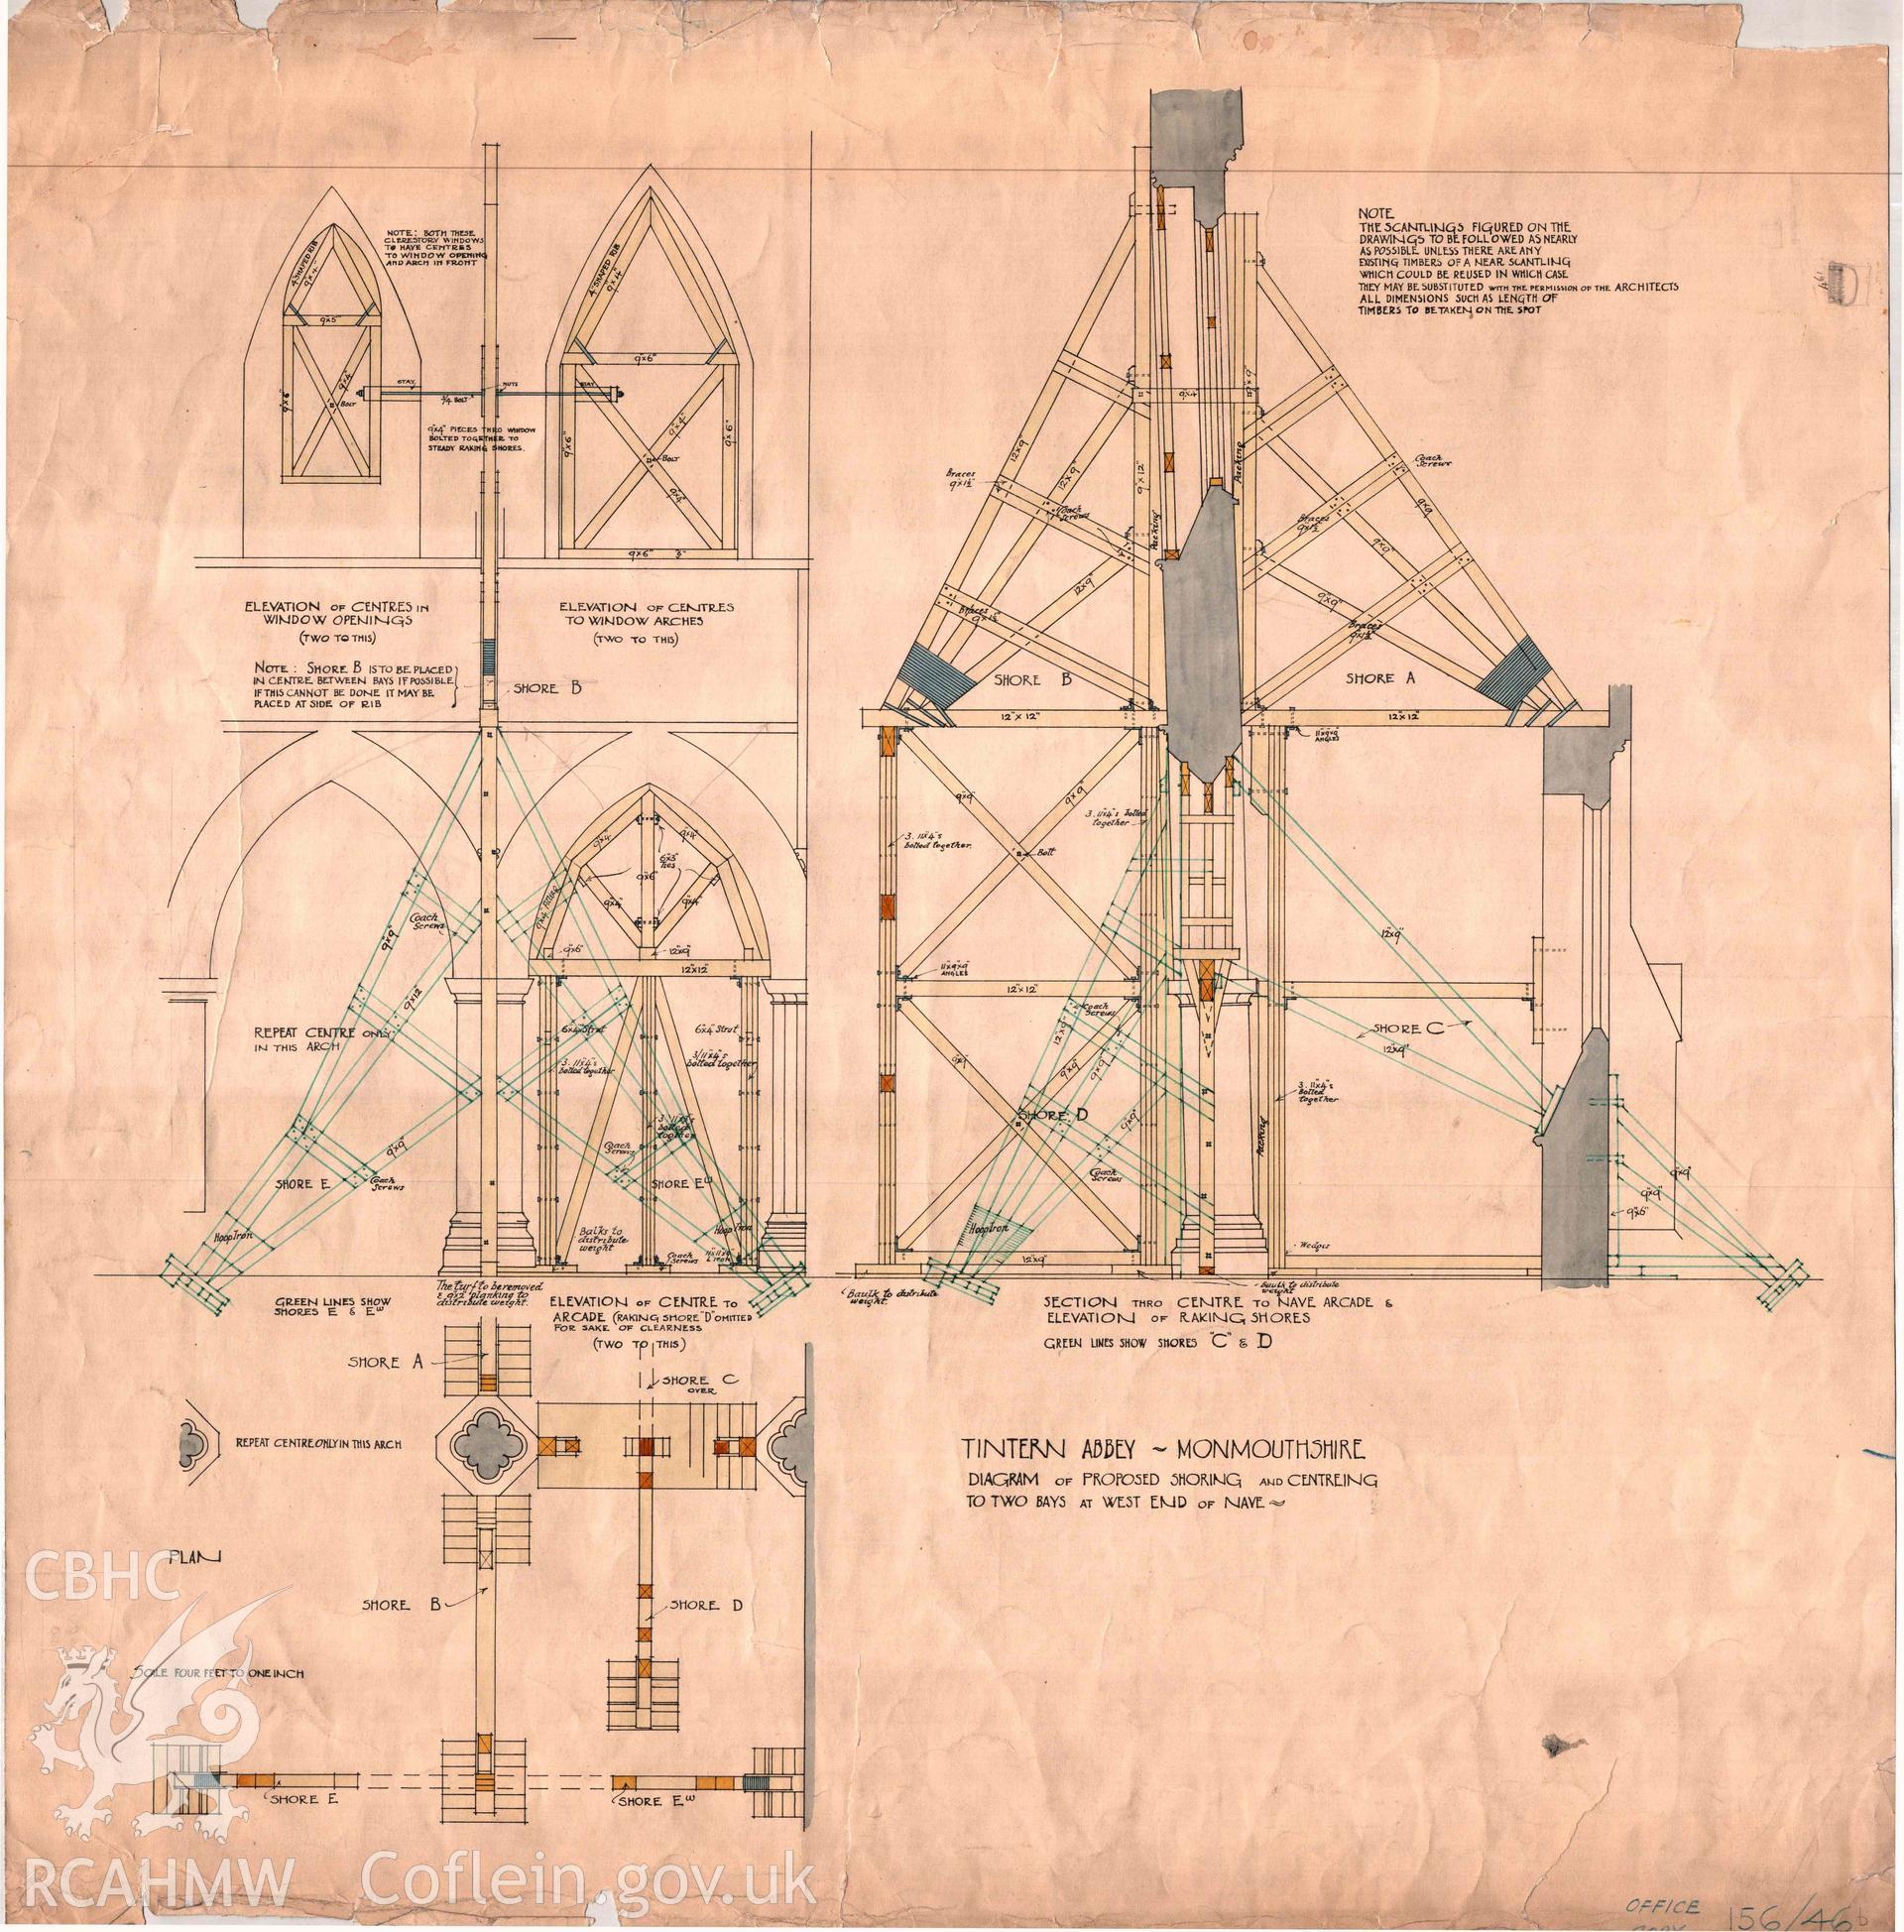 Cadw guardianship monument drawing, diagram of proposed shoring and centreing of 2 bays at west end of nave, Tintern Abbey.